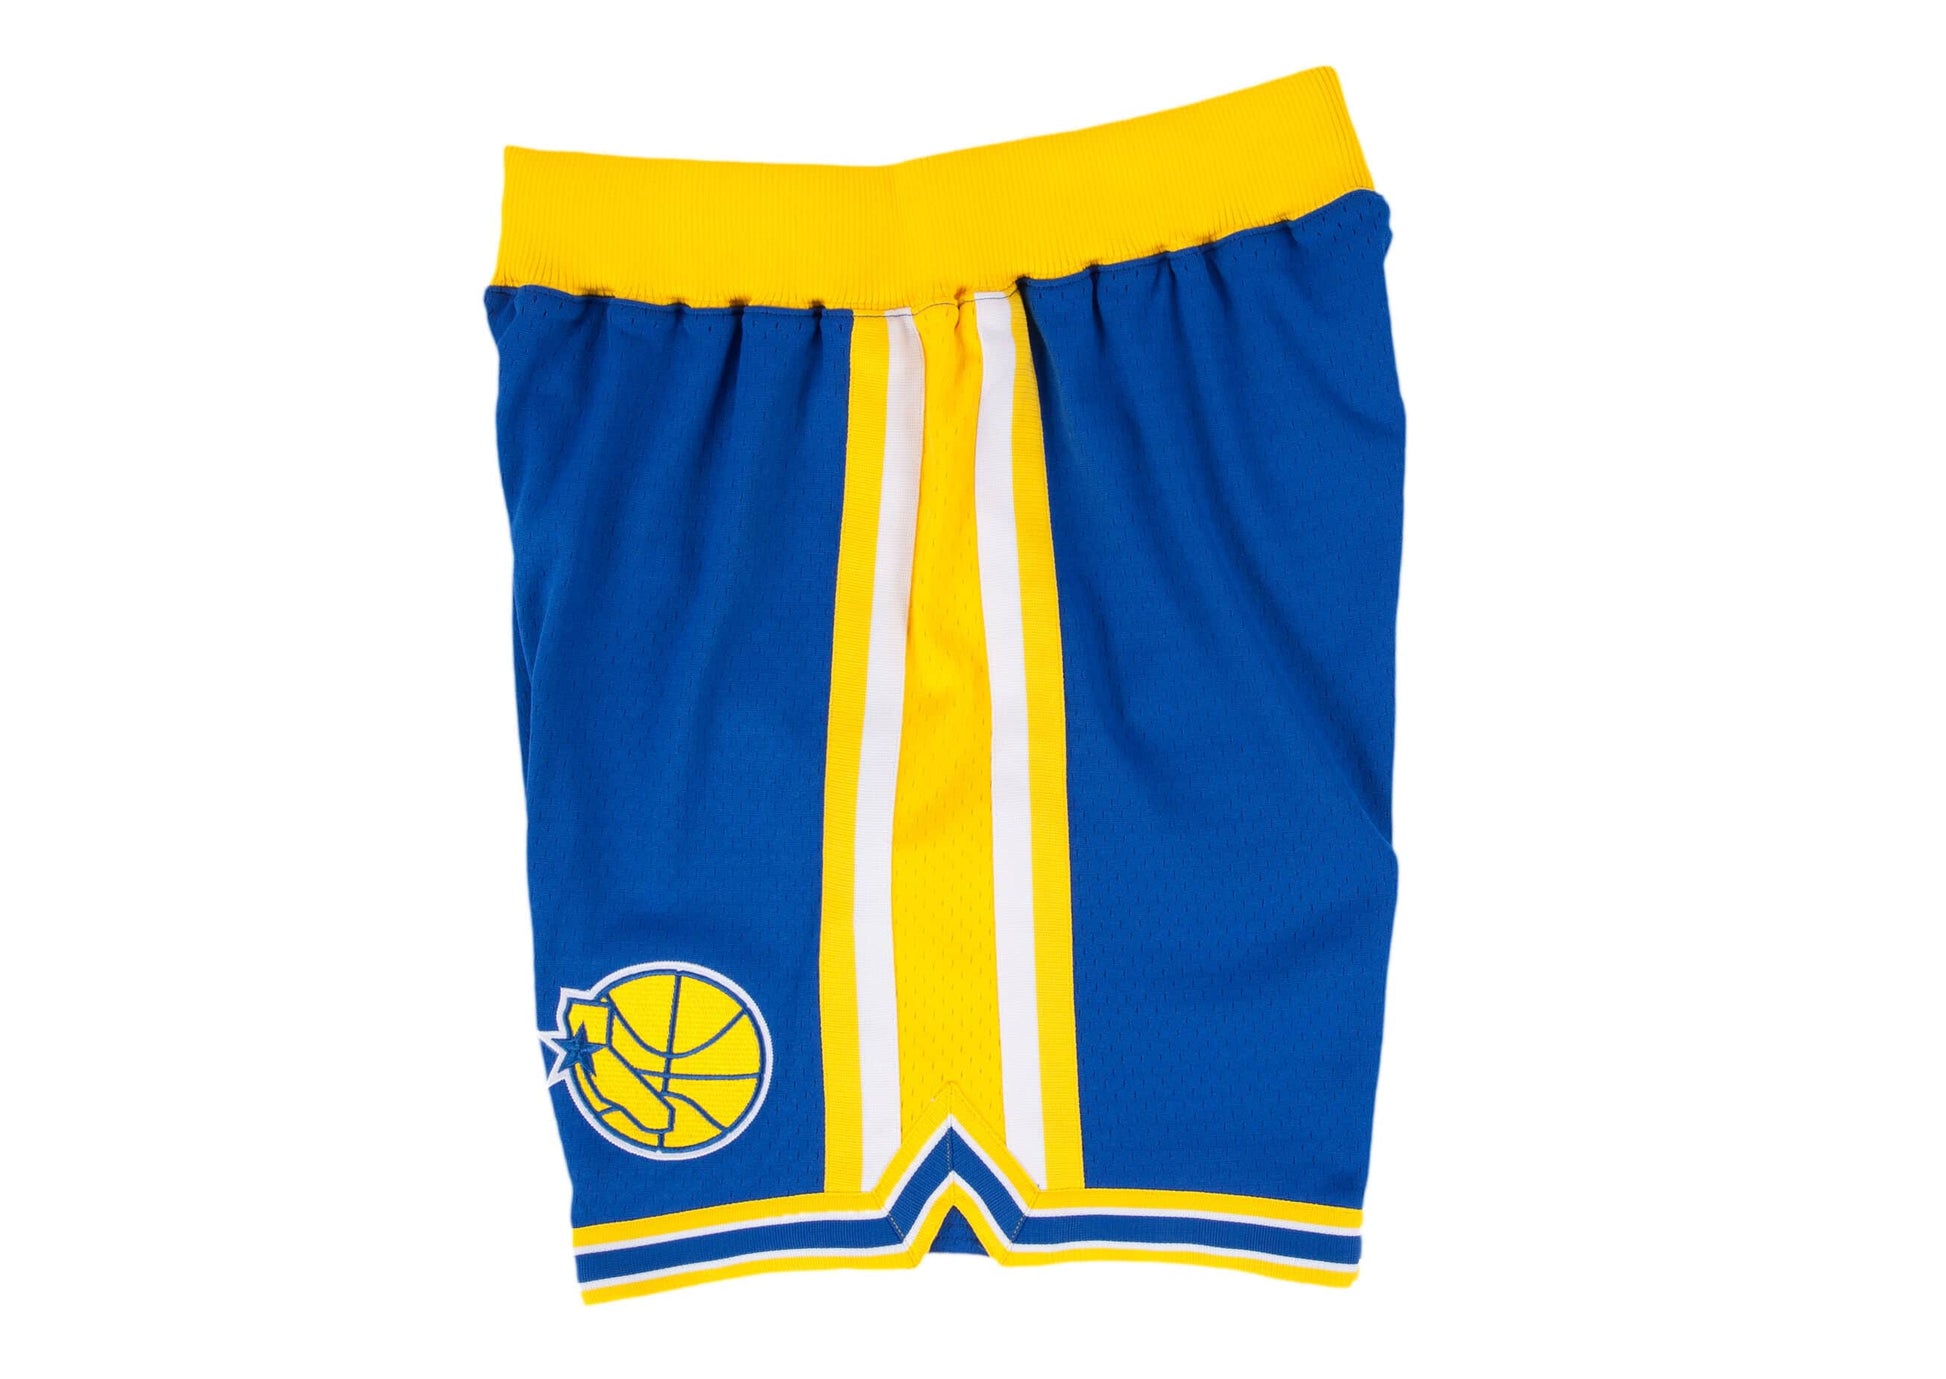 NBA Golden State Warriors Throwback Basketball Game Shorts Gold Size 46+2+2